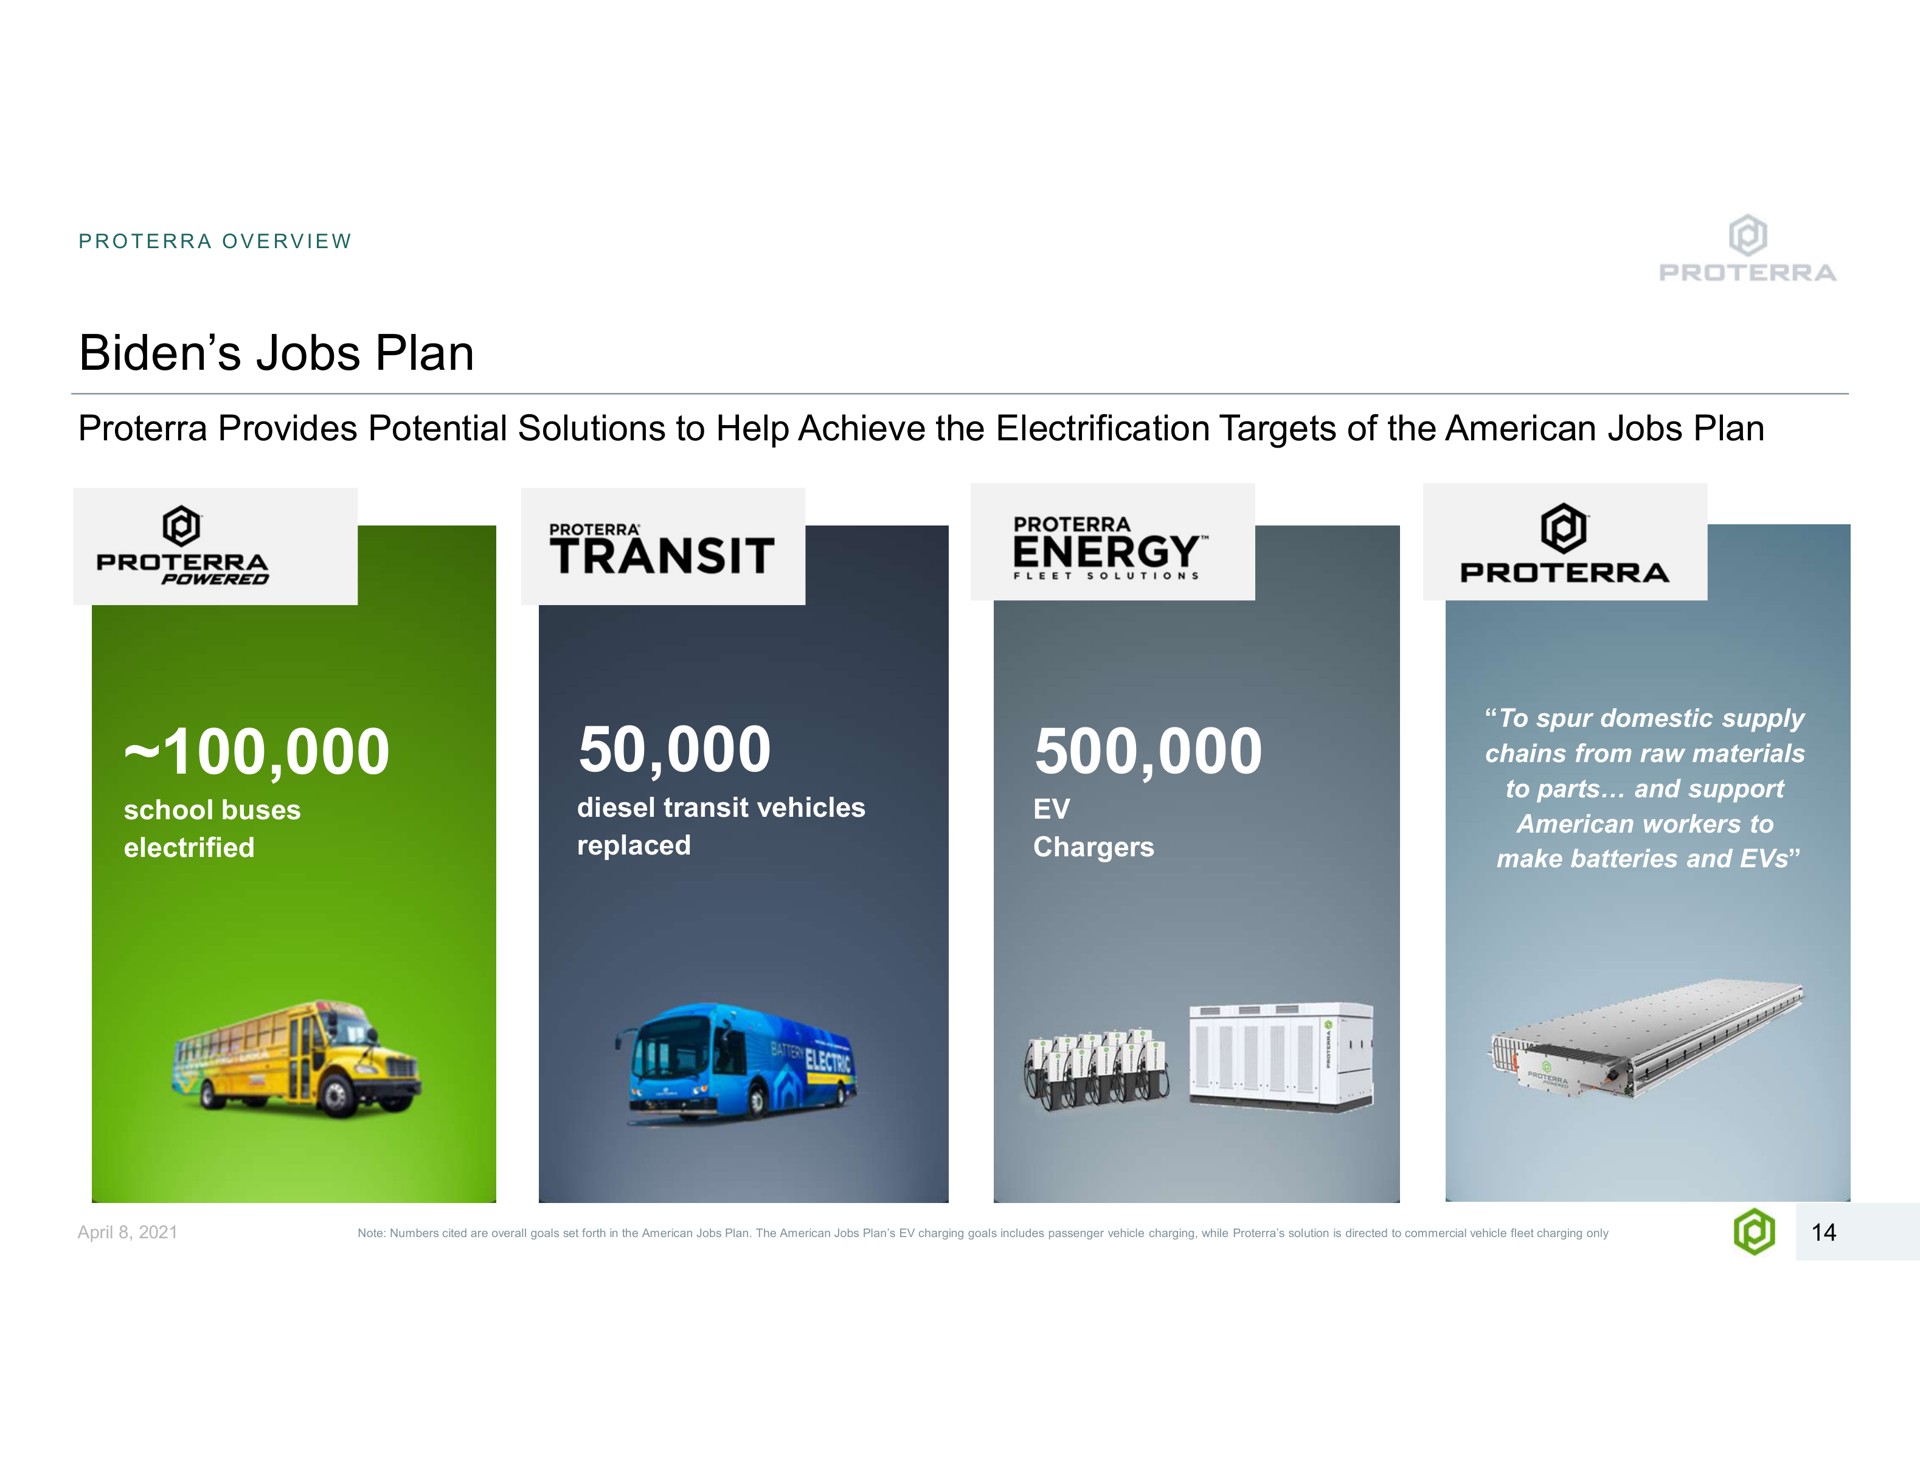 jobs plan overview provides potential solutions to help achieve the electrification targets of the transit powered energy fleet solutions school buses electrified diesel transit vehicles replaced lily chargers to spur domestic supply chains from raw materials to parts and support workers to make batteries and if note numbers cited are overall goals set forth in the the an charging goals includes passenger vehicle charging while solution is directed to commercial vehicle fleet charging only | Proterra